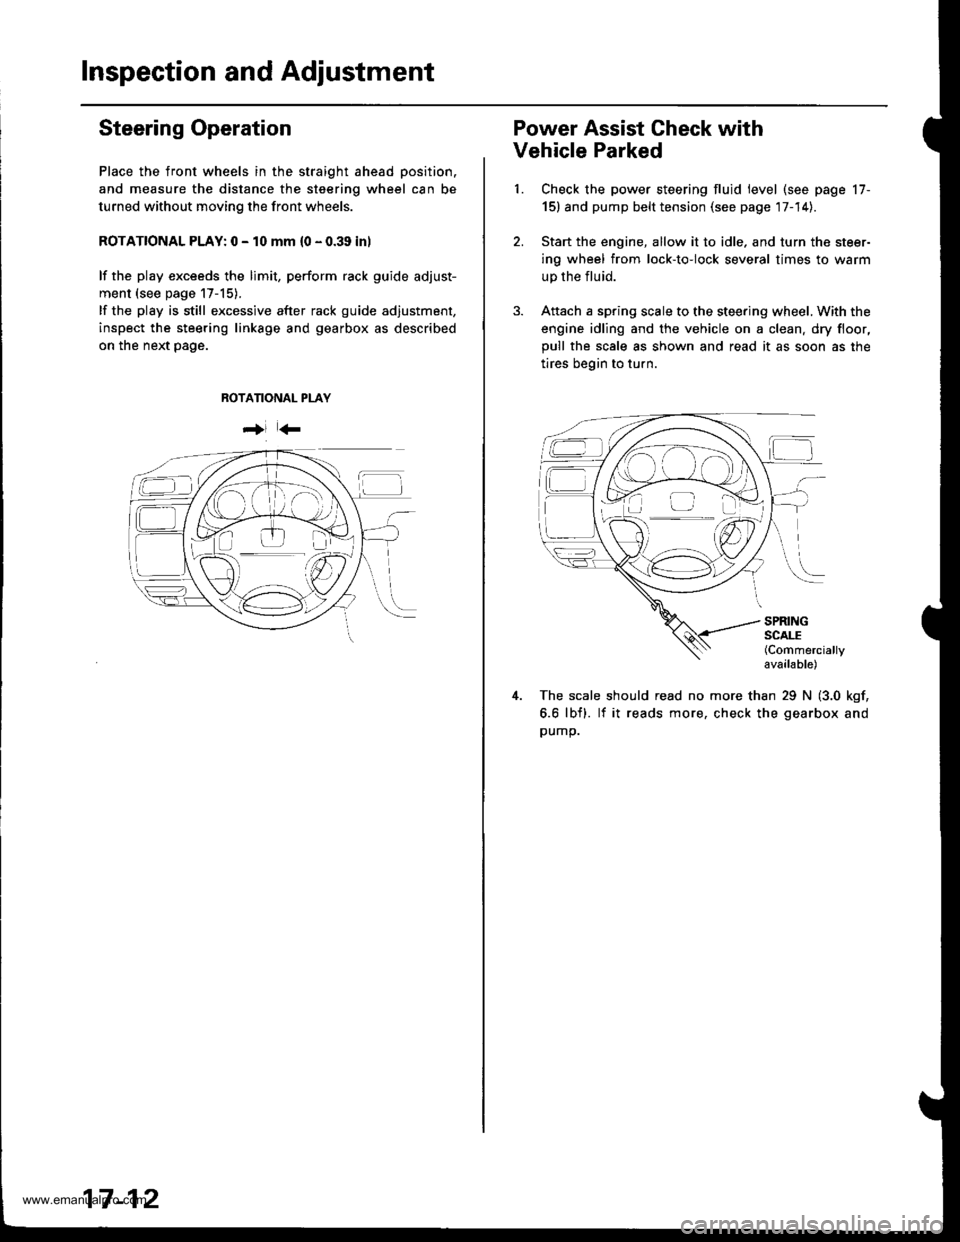 HONDA CR-V 1998 RD1-RD3 / 1.G Service Manual 
Inspection and Adjustment
Steering Operation
Place the front wheels in the straight ahead position.
and measure the distance the steering wheel can be
turned without moving the front wheels.
ROTATION